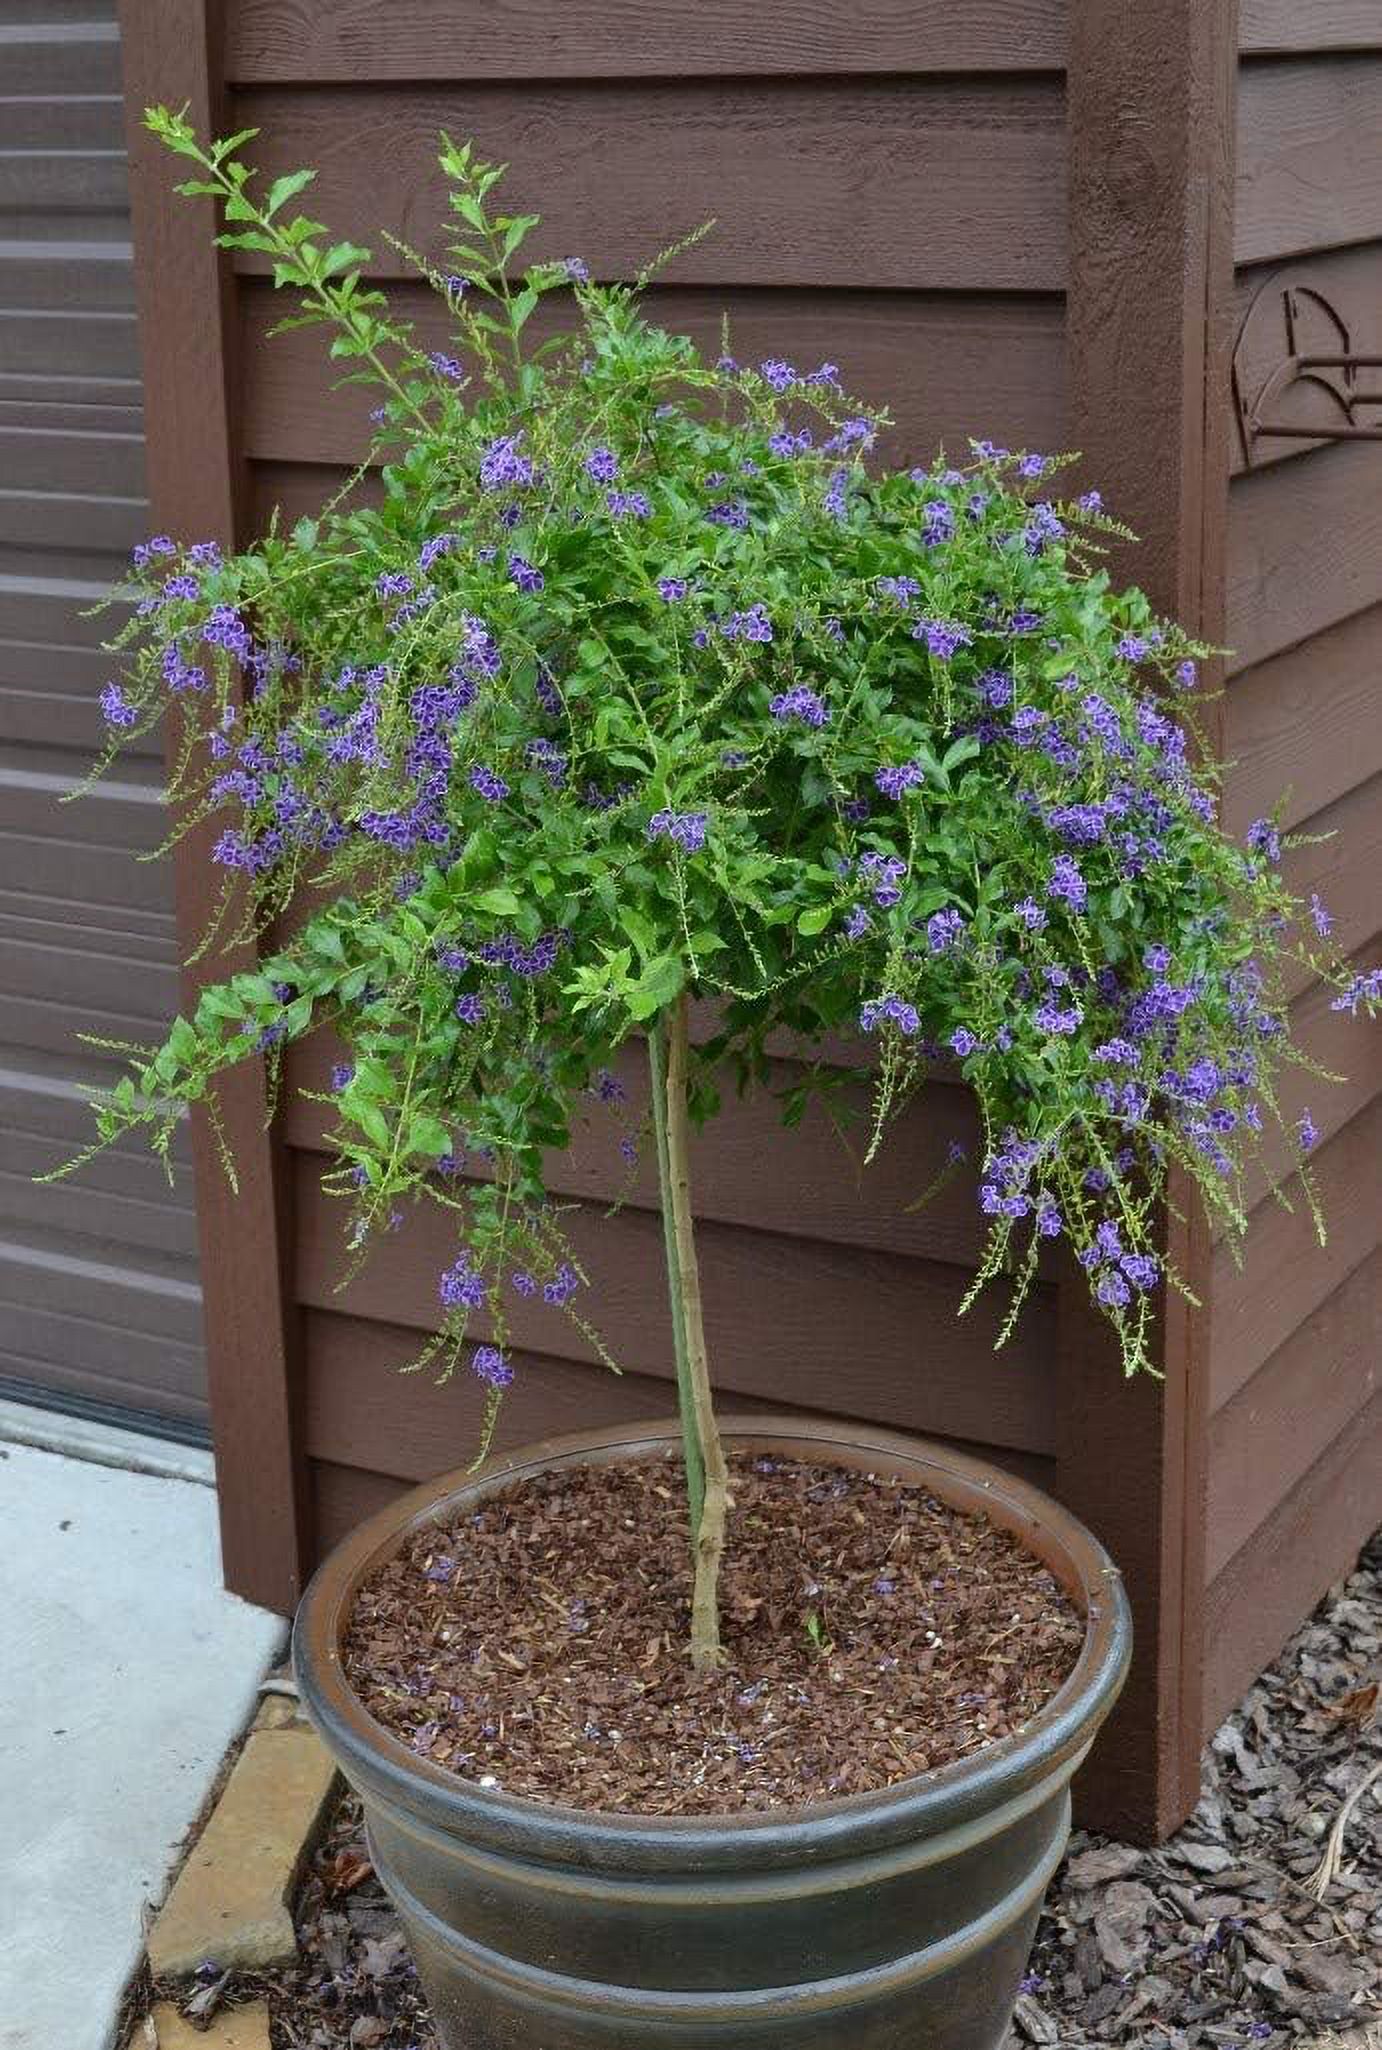 Sapphire Showers Duranta - Live Plant in a 10 Inch Pot - Duranta Erecta "Sapphire Showers" - Beautiful Flowering Butterfly Attracting Patio Plant - image 2 of 6